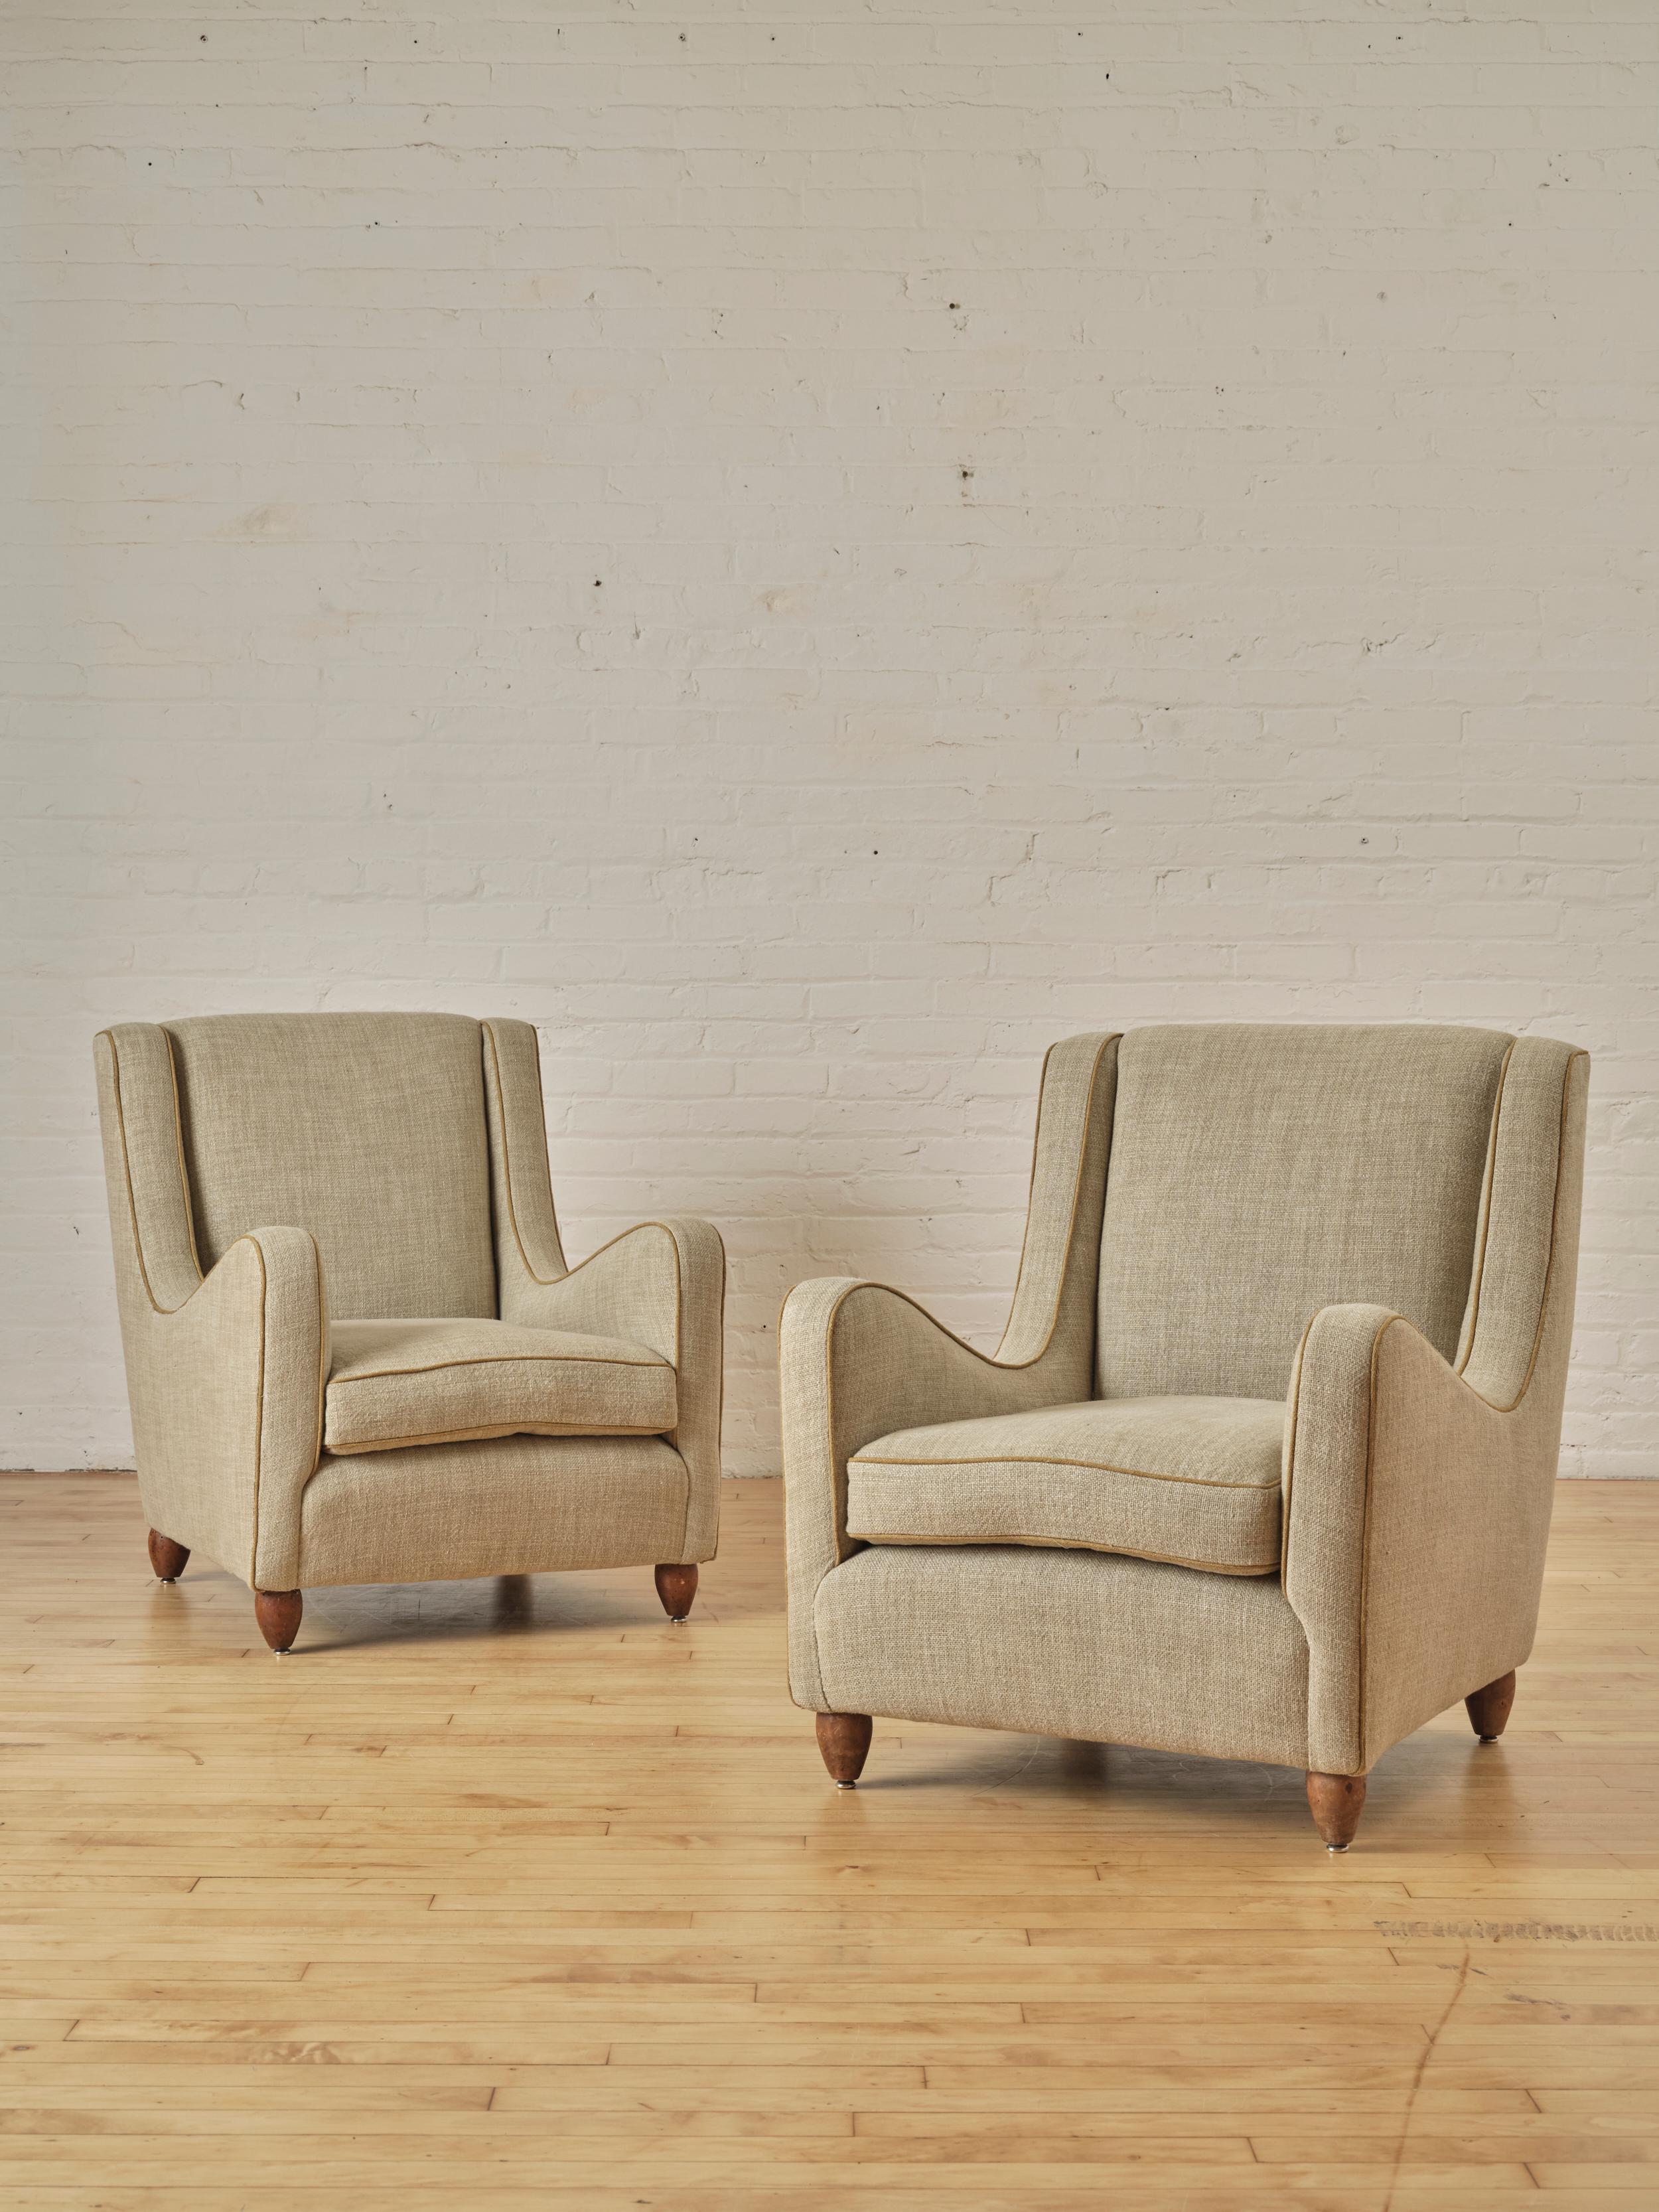 A Pair of Italian Modern Lounge Chairs in the Manner of Gio Ponti reupholstered in a oatmeal heavy Linen and Cotton fabric with yellow piping. 

